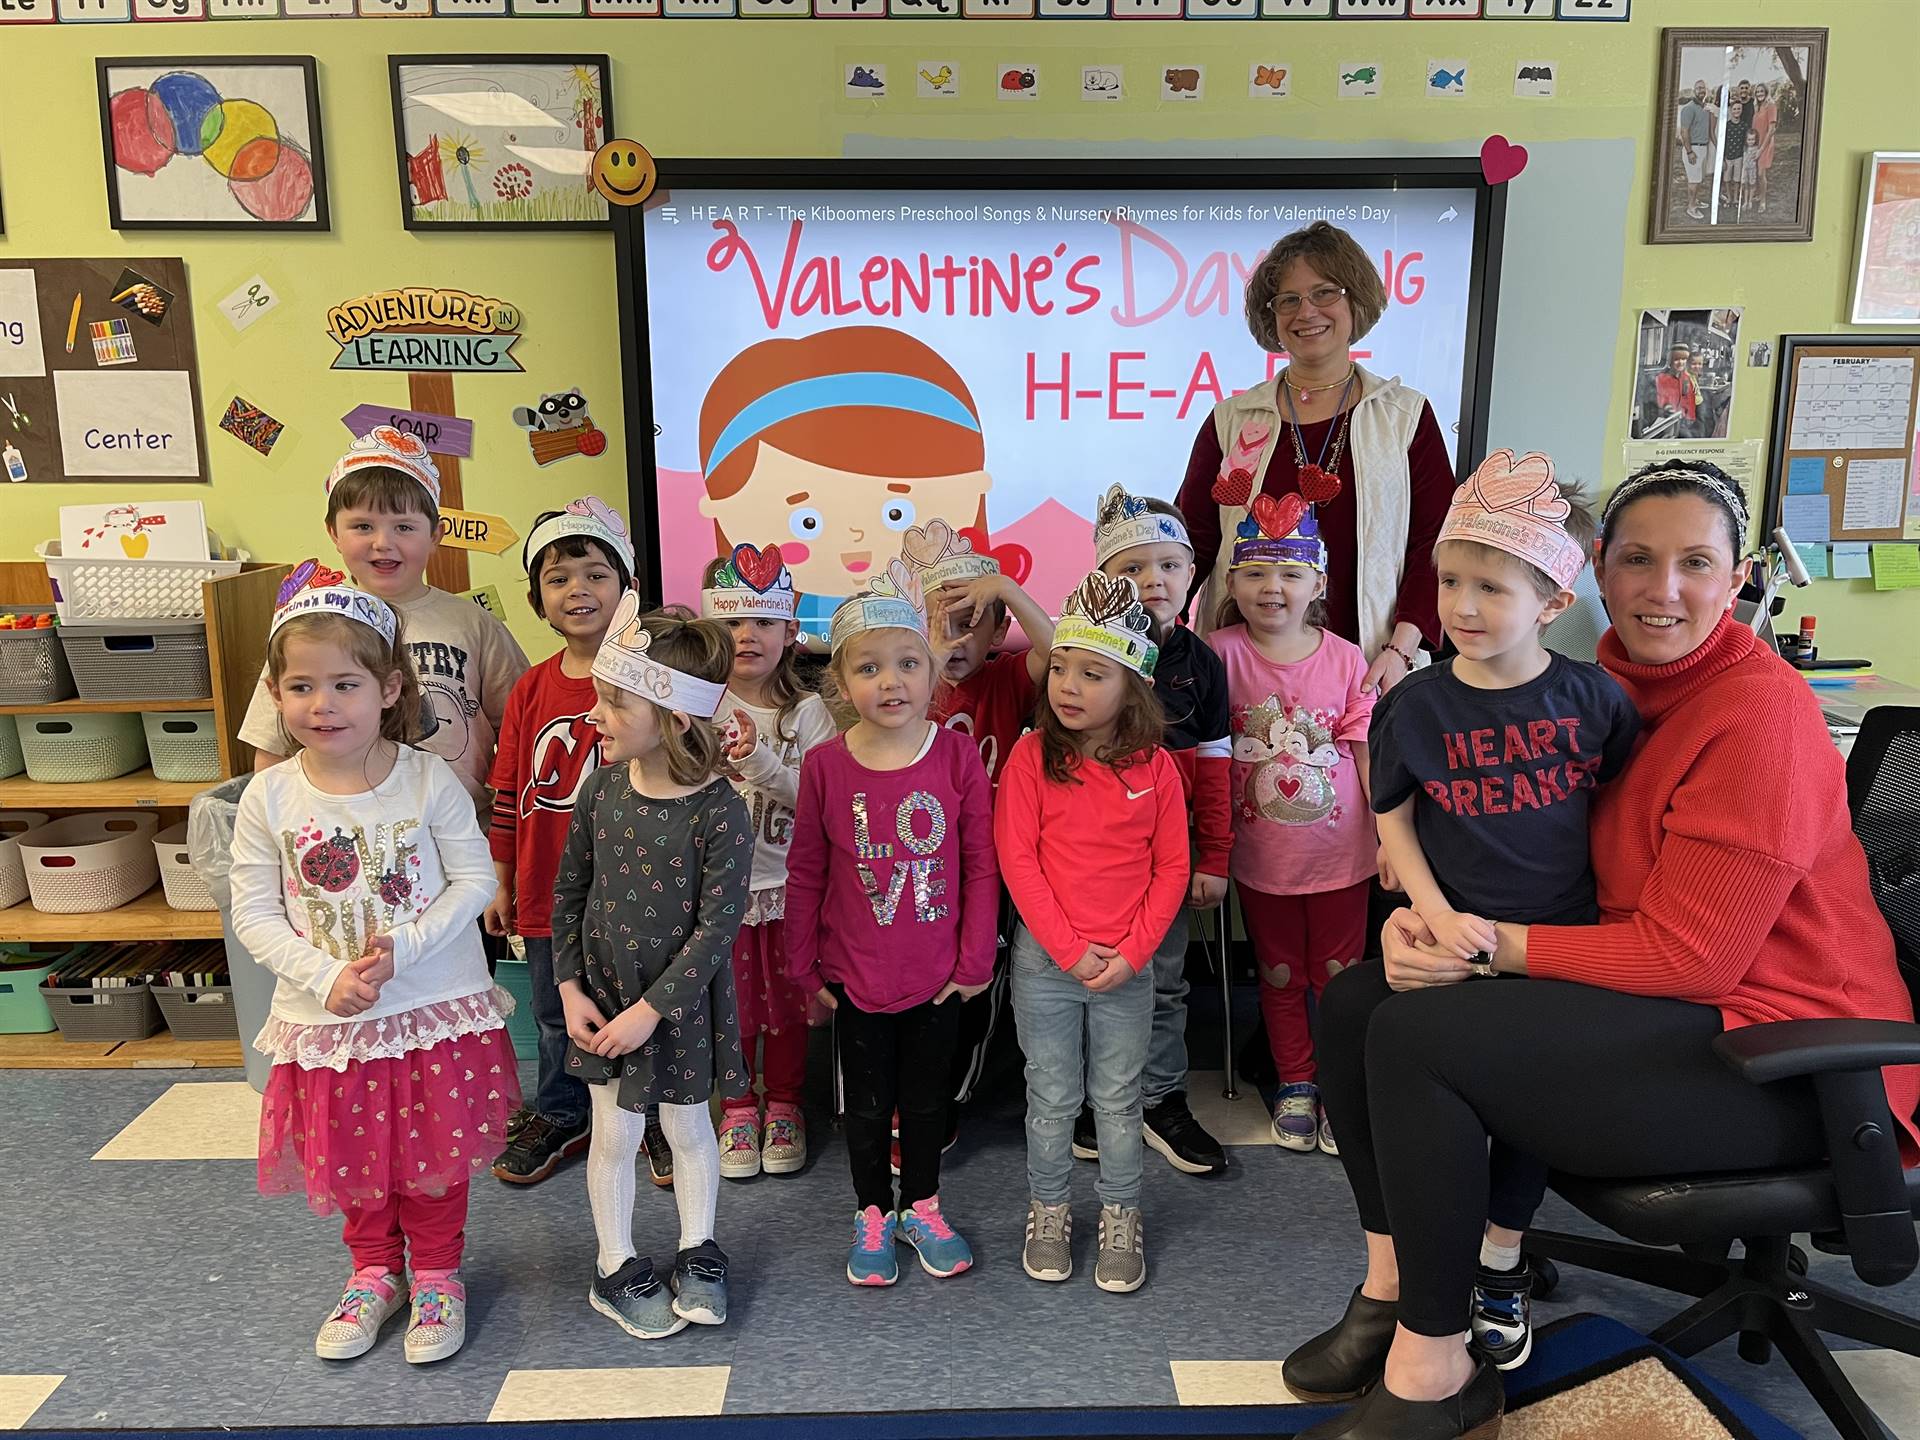 students with heart hats and 2 staff members.